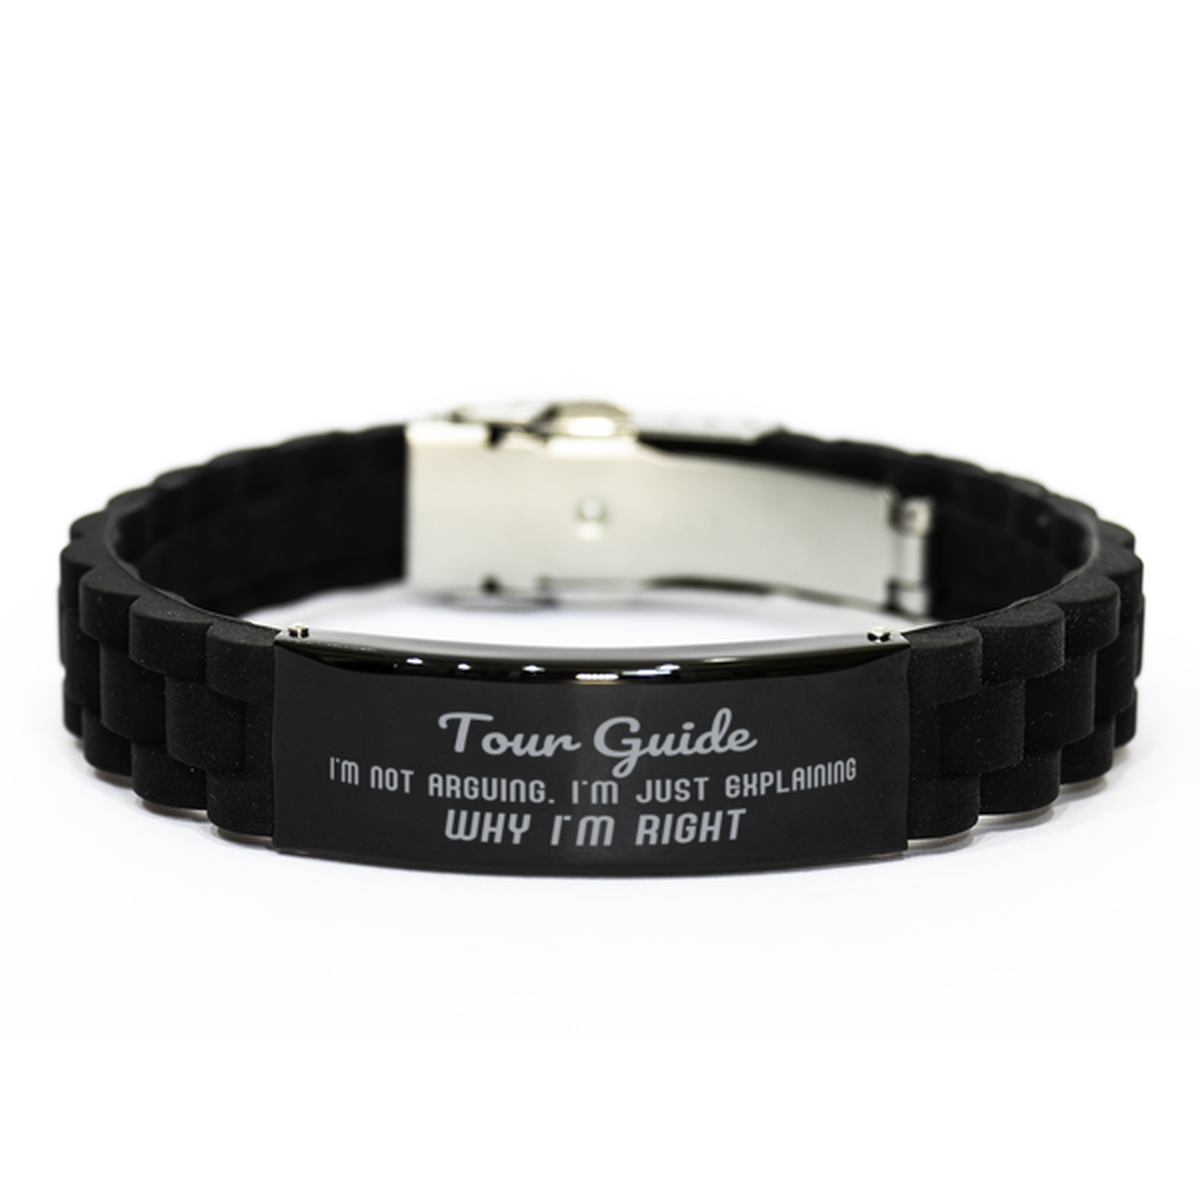 Tour Guide I'm not Arguing. I'm Just Explaining Why I'm RIGHT Black Glidelock Clasp Bracelet, Funny Saying Quote Tour Guide Gifts For Tour Guide Graduation Birthday Christmas Gifts for Men Women Coworker